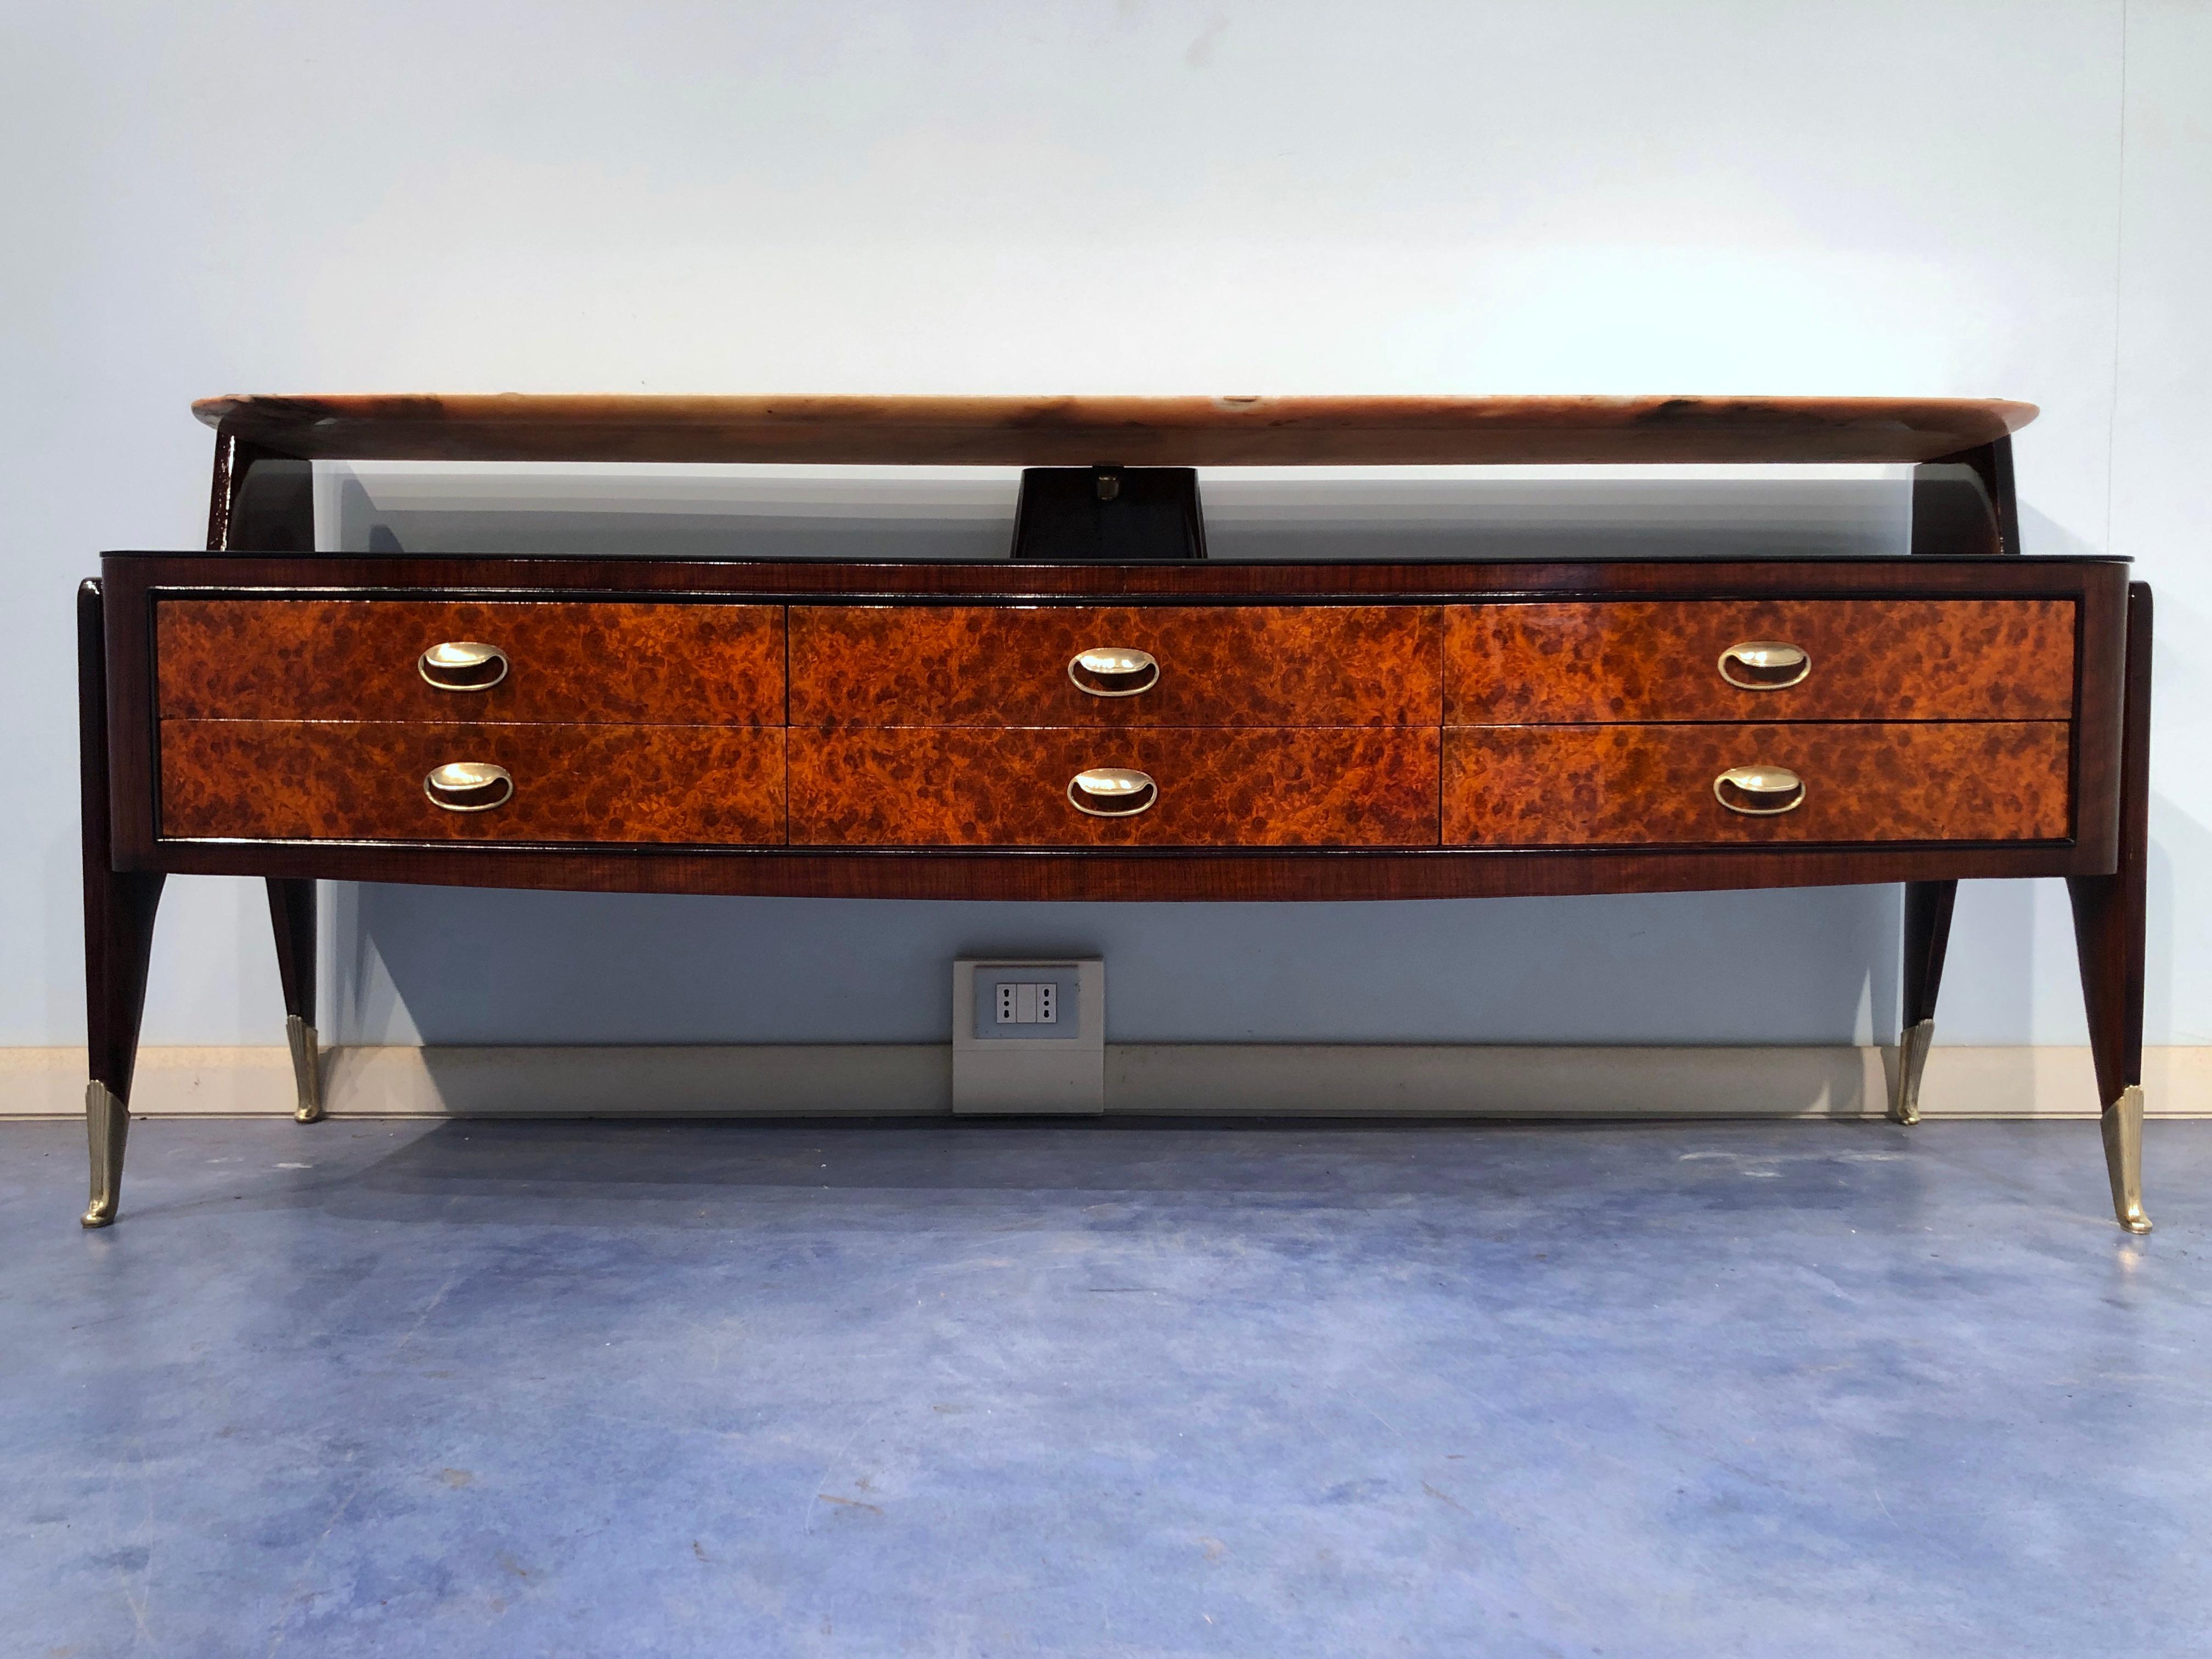 Rare and unusual Italian midcentury sideboard by Vittorio Dassi, circa 1950.
A beautiful line and a unique design are the main characteristics of this sideboard.
The double top is in Portuguese marble and in black glass, it gives a handsome